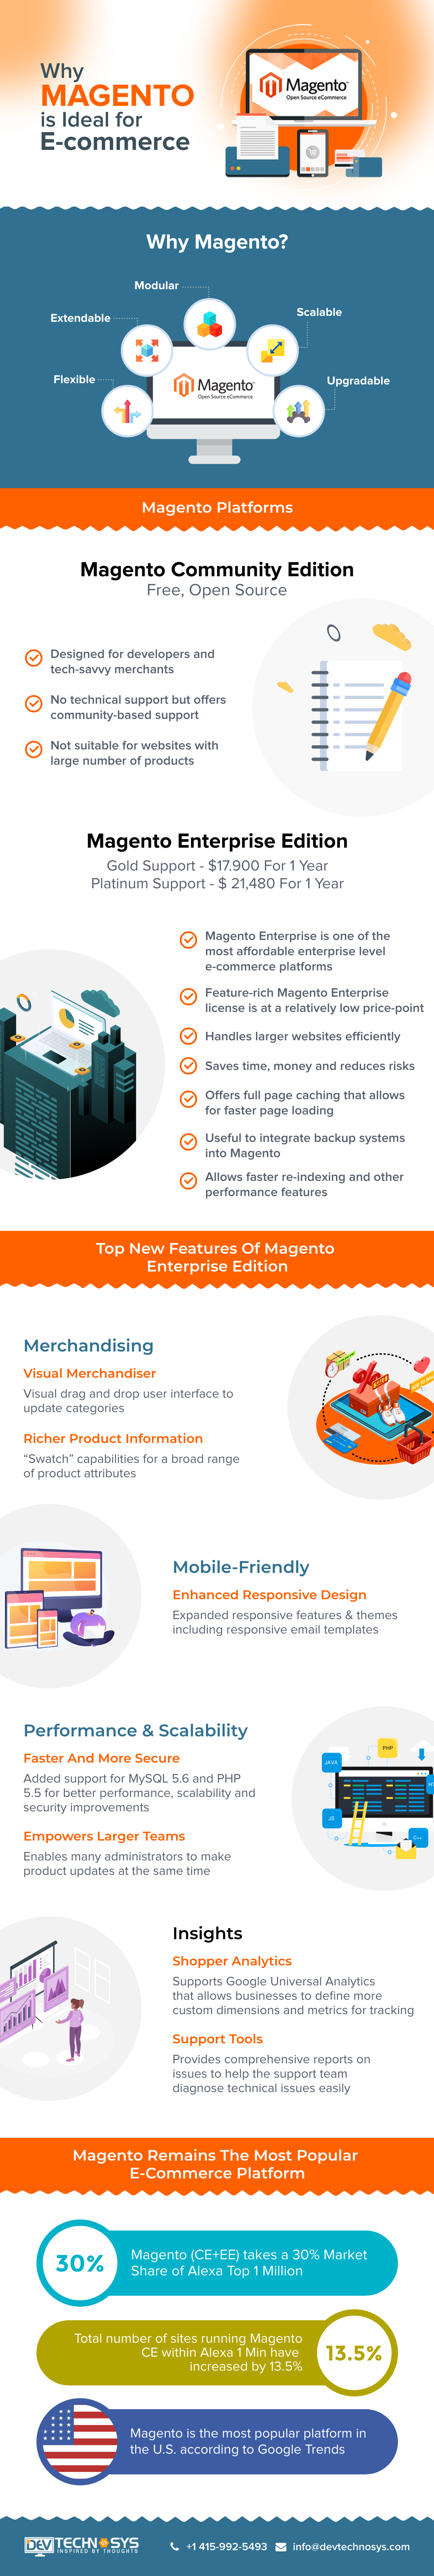 Magento Ideal for E-commerce